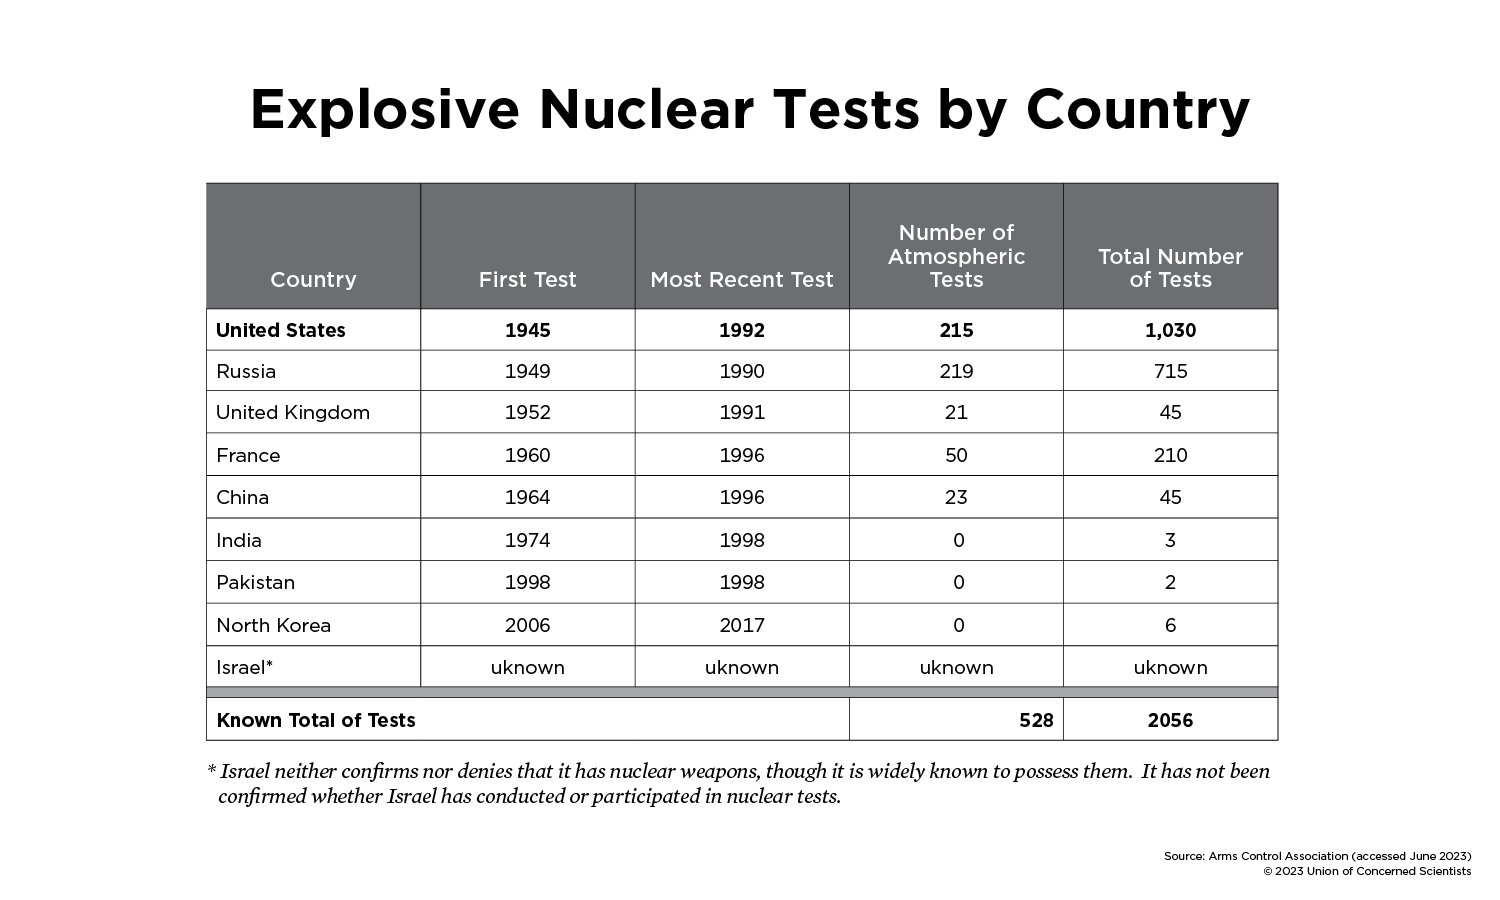 Table showing data on nuclear tests by country